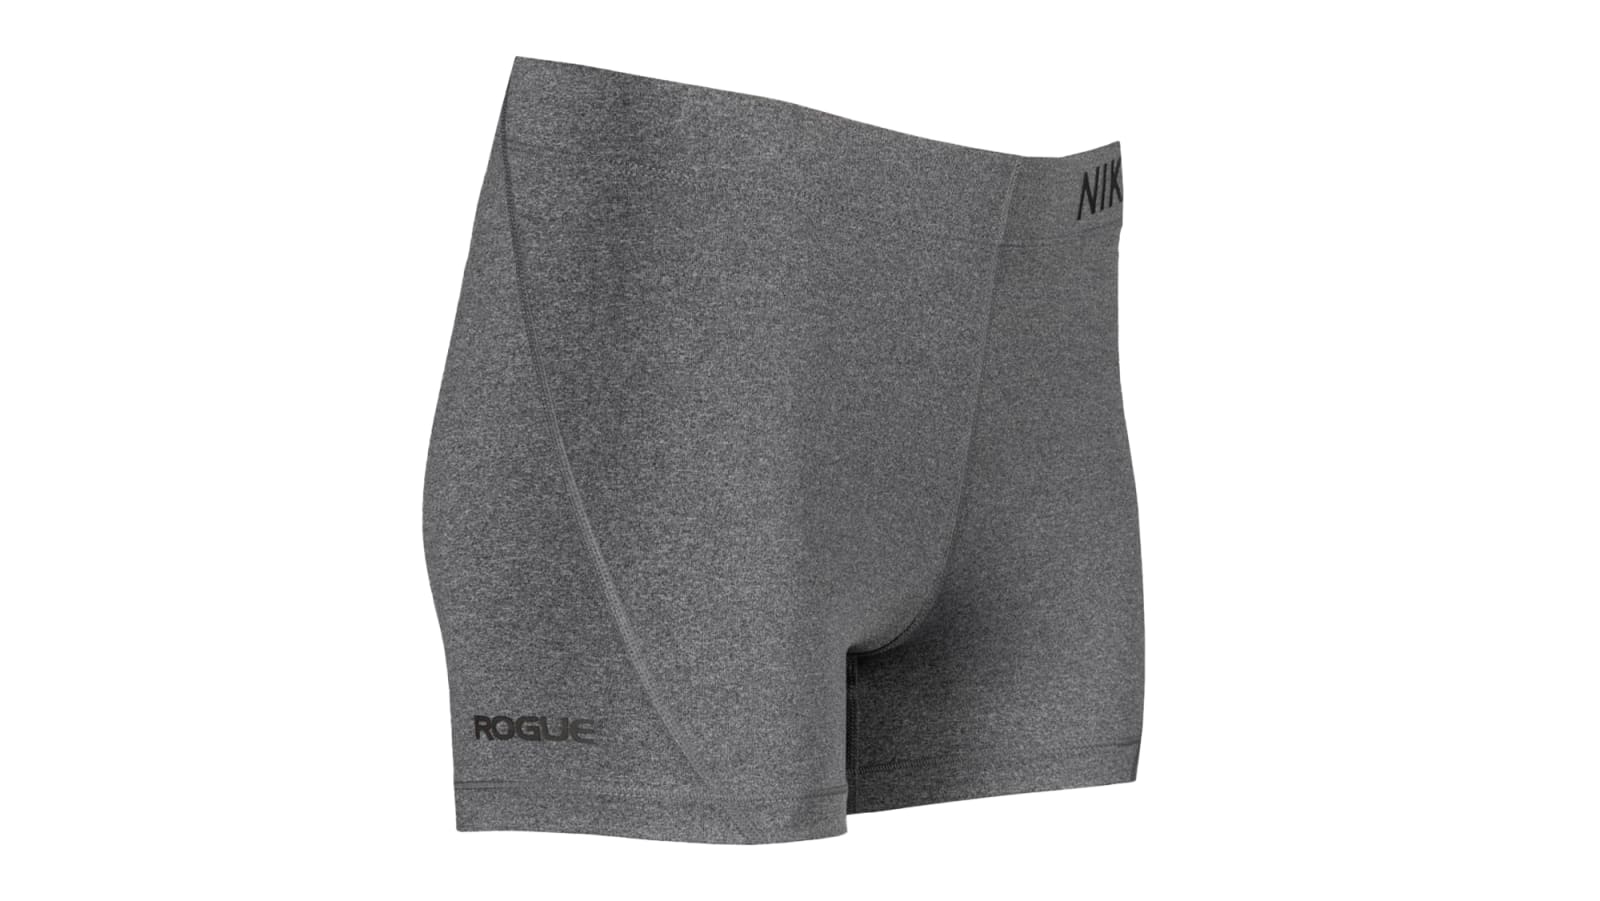 acento Impotencia dividendo Rogue Nike Women's Pro Compression Shorts - Charcoal Heather | Rogue Fitness